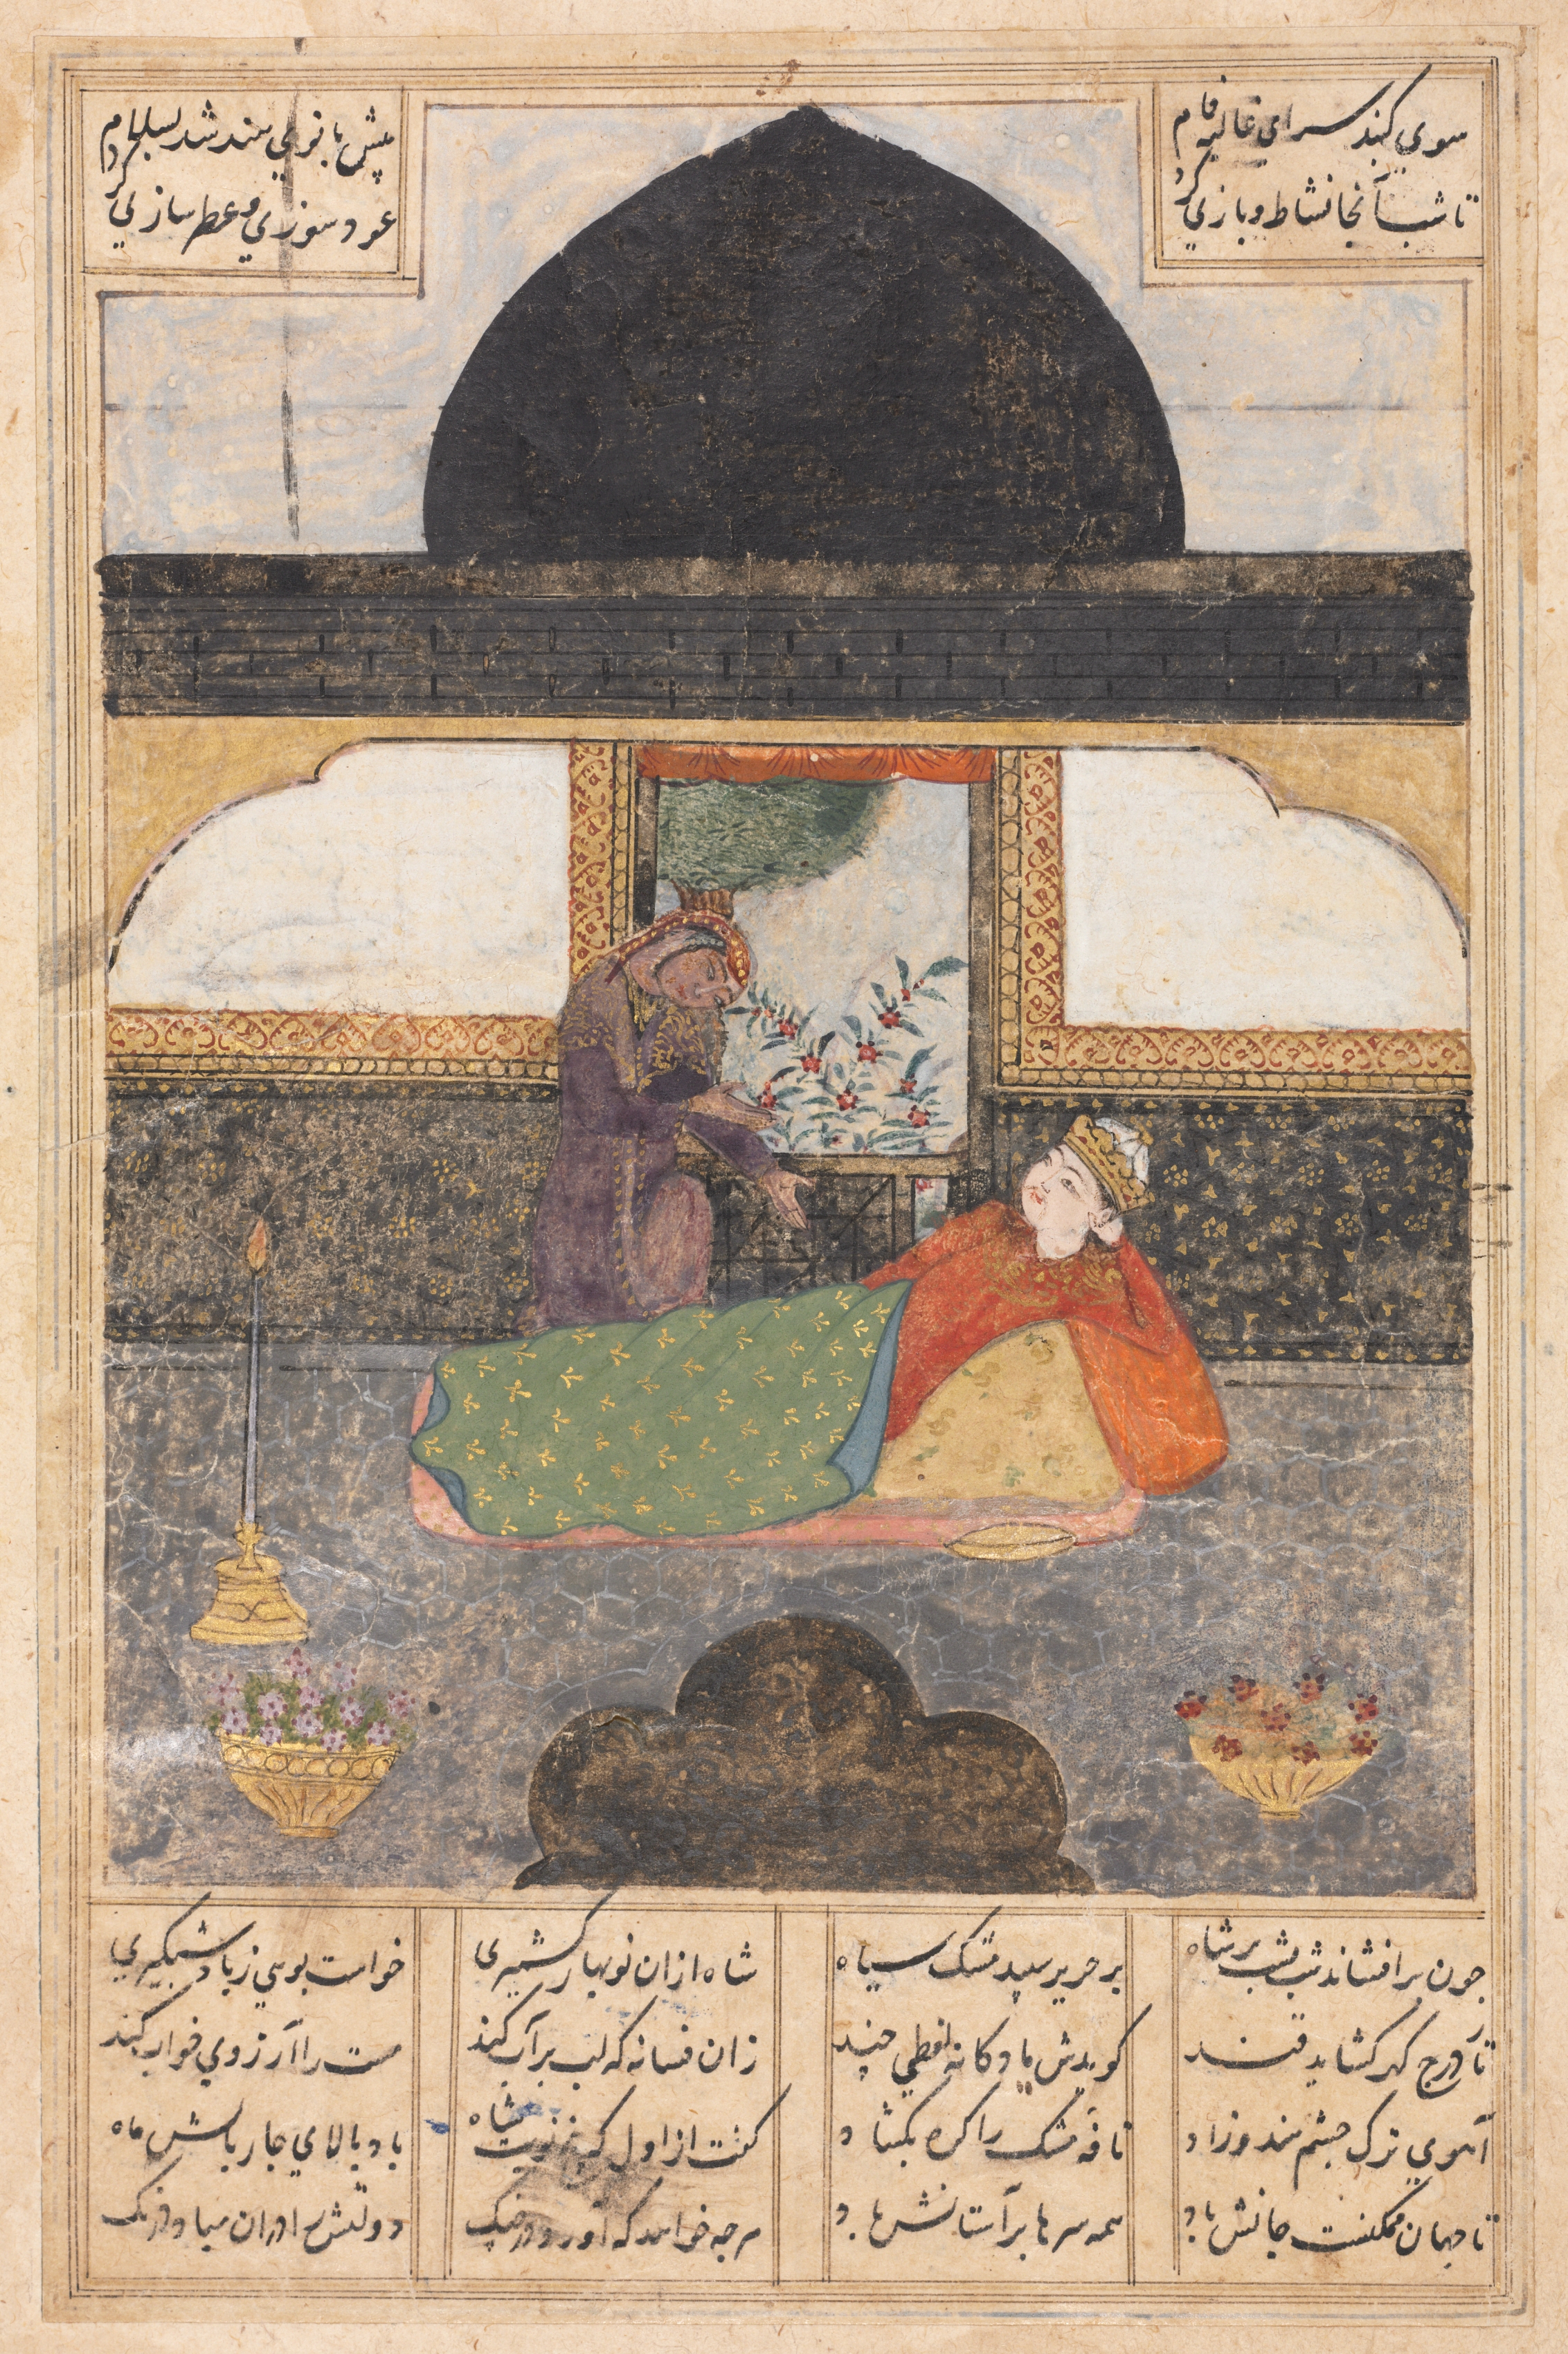 Bahram Gur Visits the Princess of India in the Black Pavilion (recto): Illustration and Text, Persian Verses, from a manuscript of the Khamsa of Nizami, Haft Paykar [Seven Portraits]